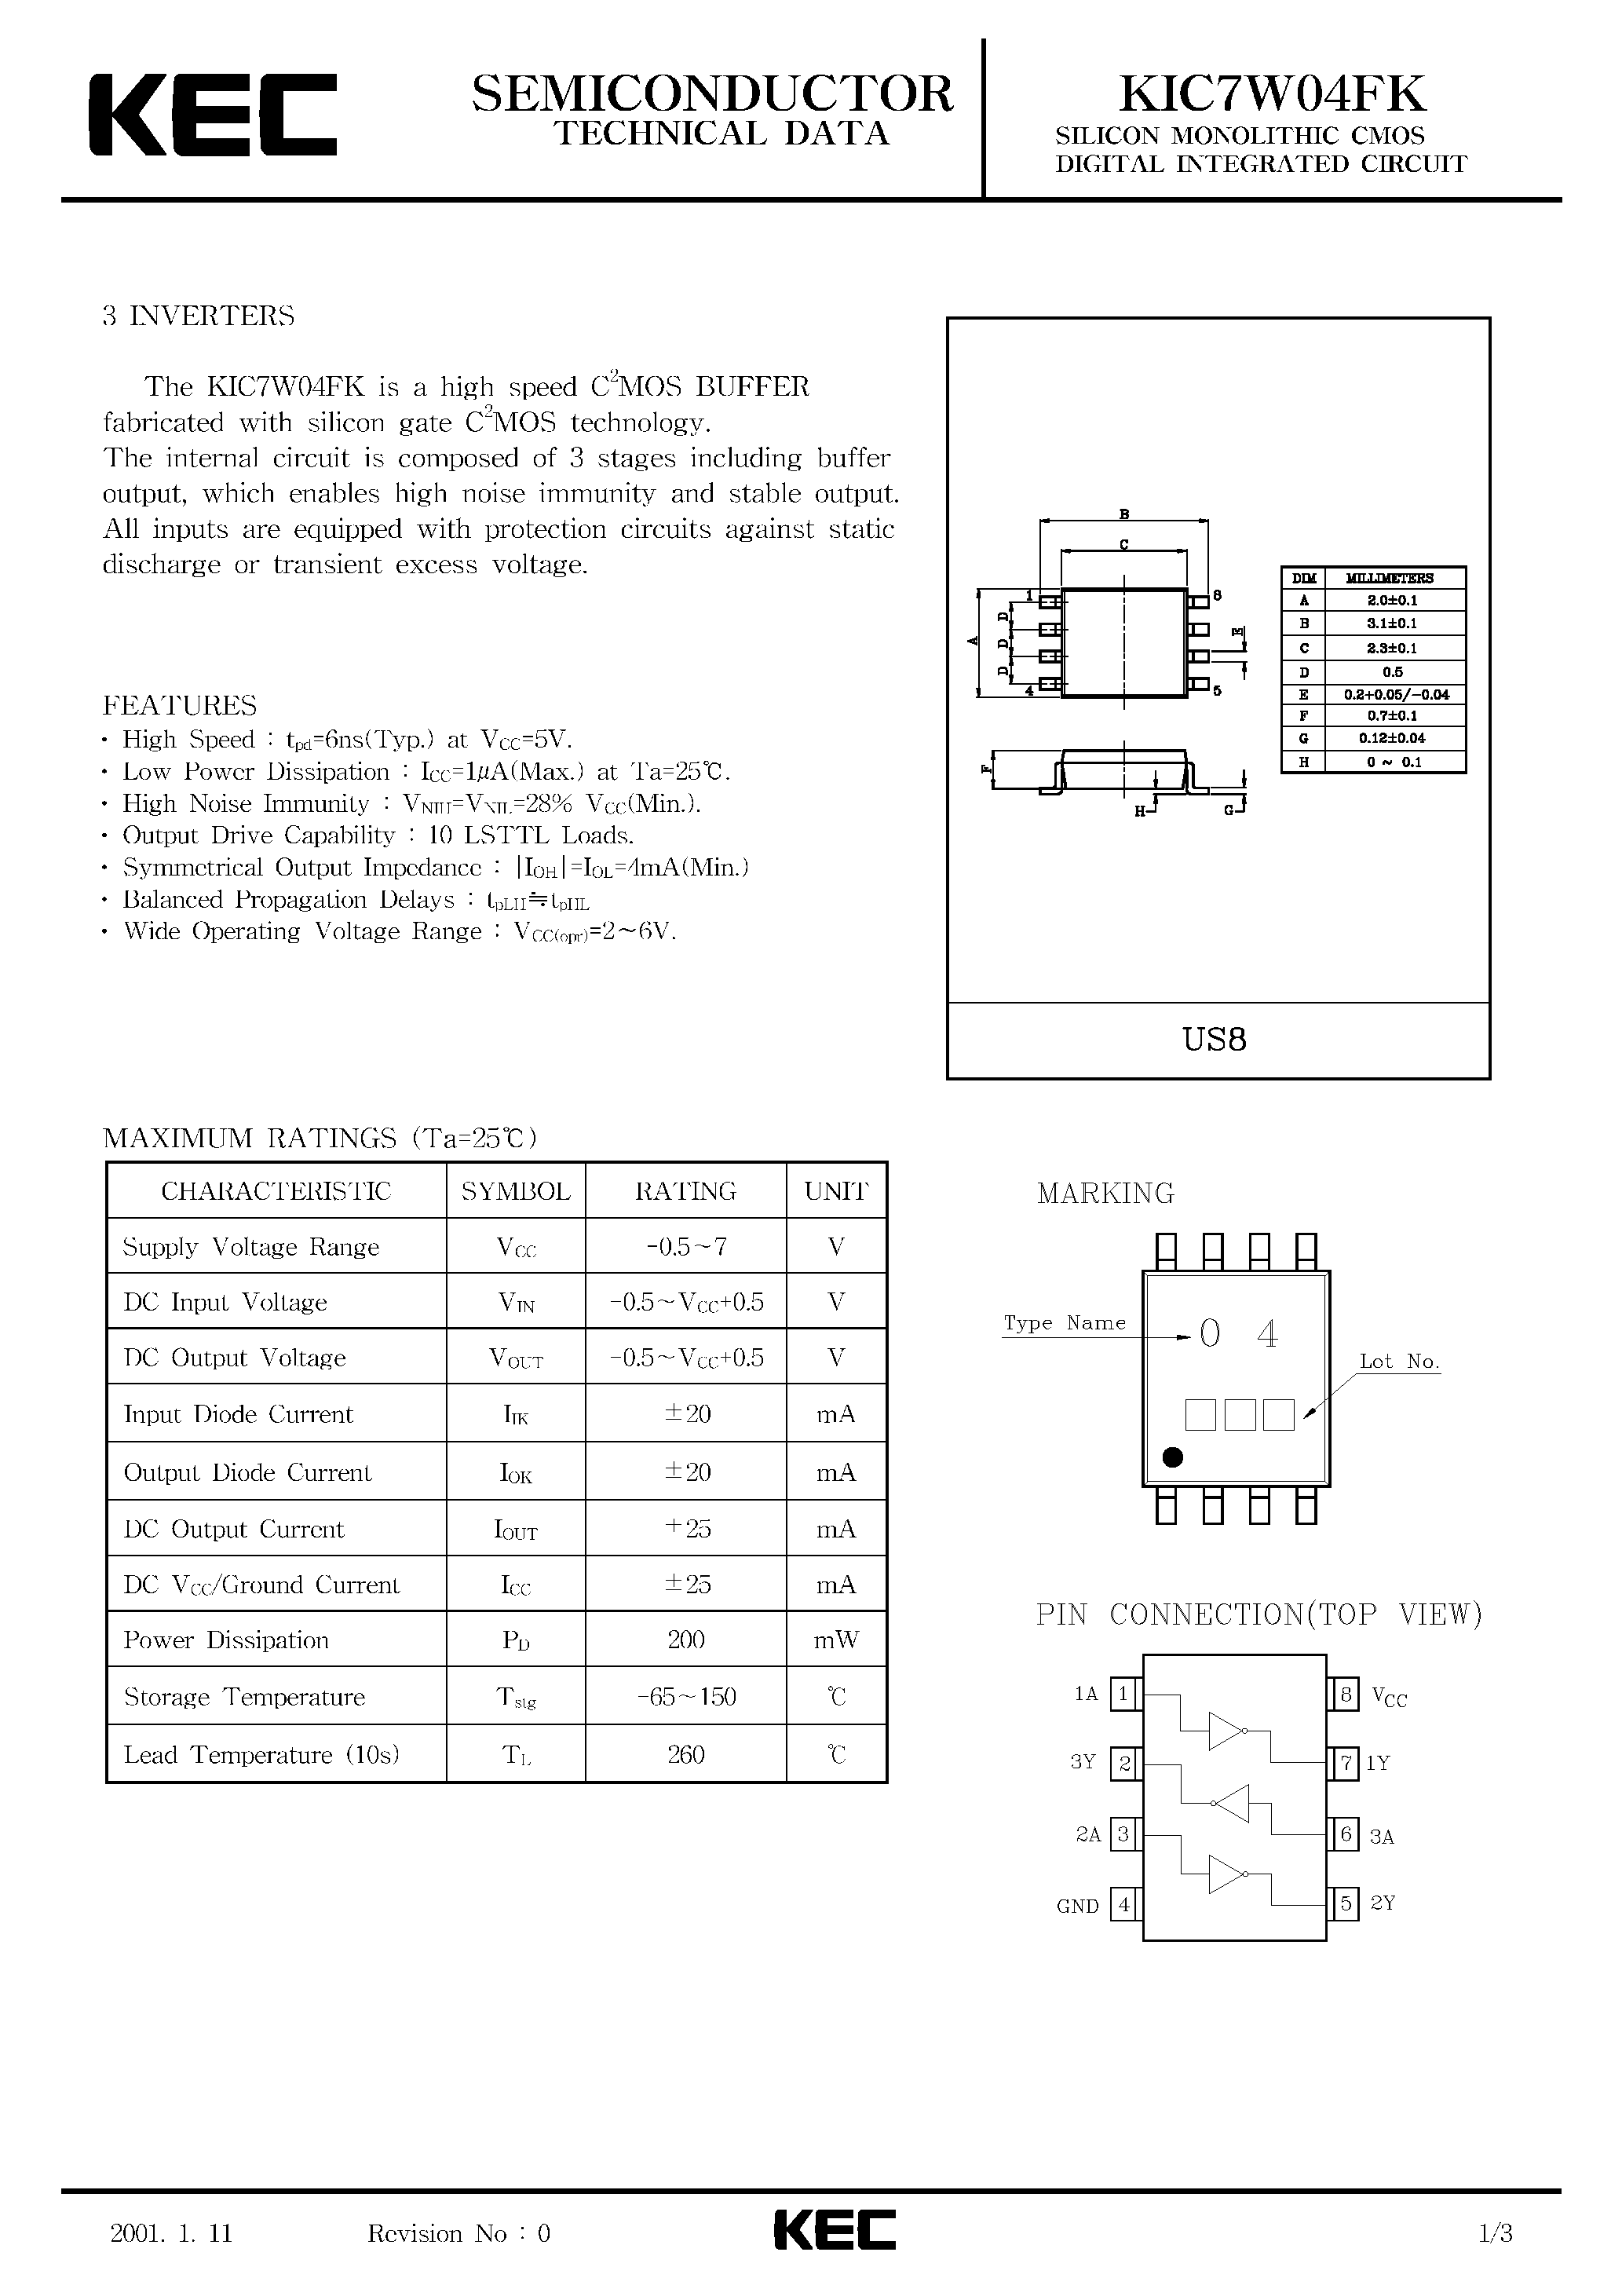 Datasheet KIC7W04FK - SILICON MONOLITHIC CMOS DIGITAL INTEGRATED CIRCUIT(3 INVERTERS) page 1